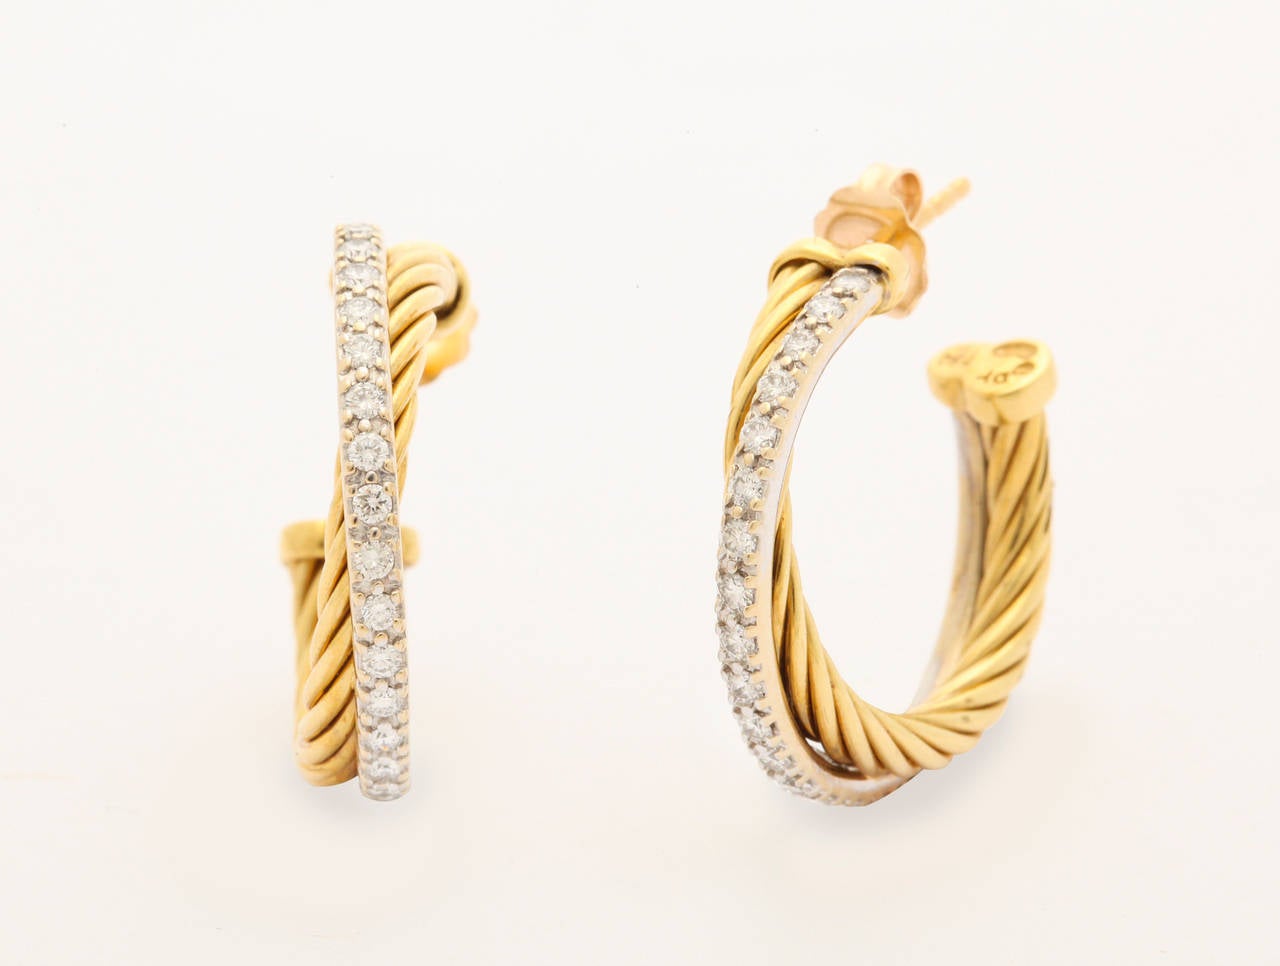 Simple and elegant David Yurman earrings in 18K in a cross over design. The diamonds  are set in white gold and have .72 carats of diamonds. Diamonds are clear, white and really sparkle. The yellow gold hoop is in the classic Yurman cable design.